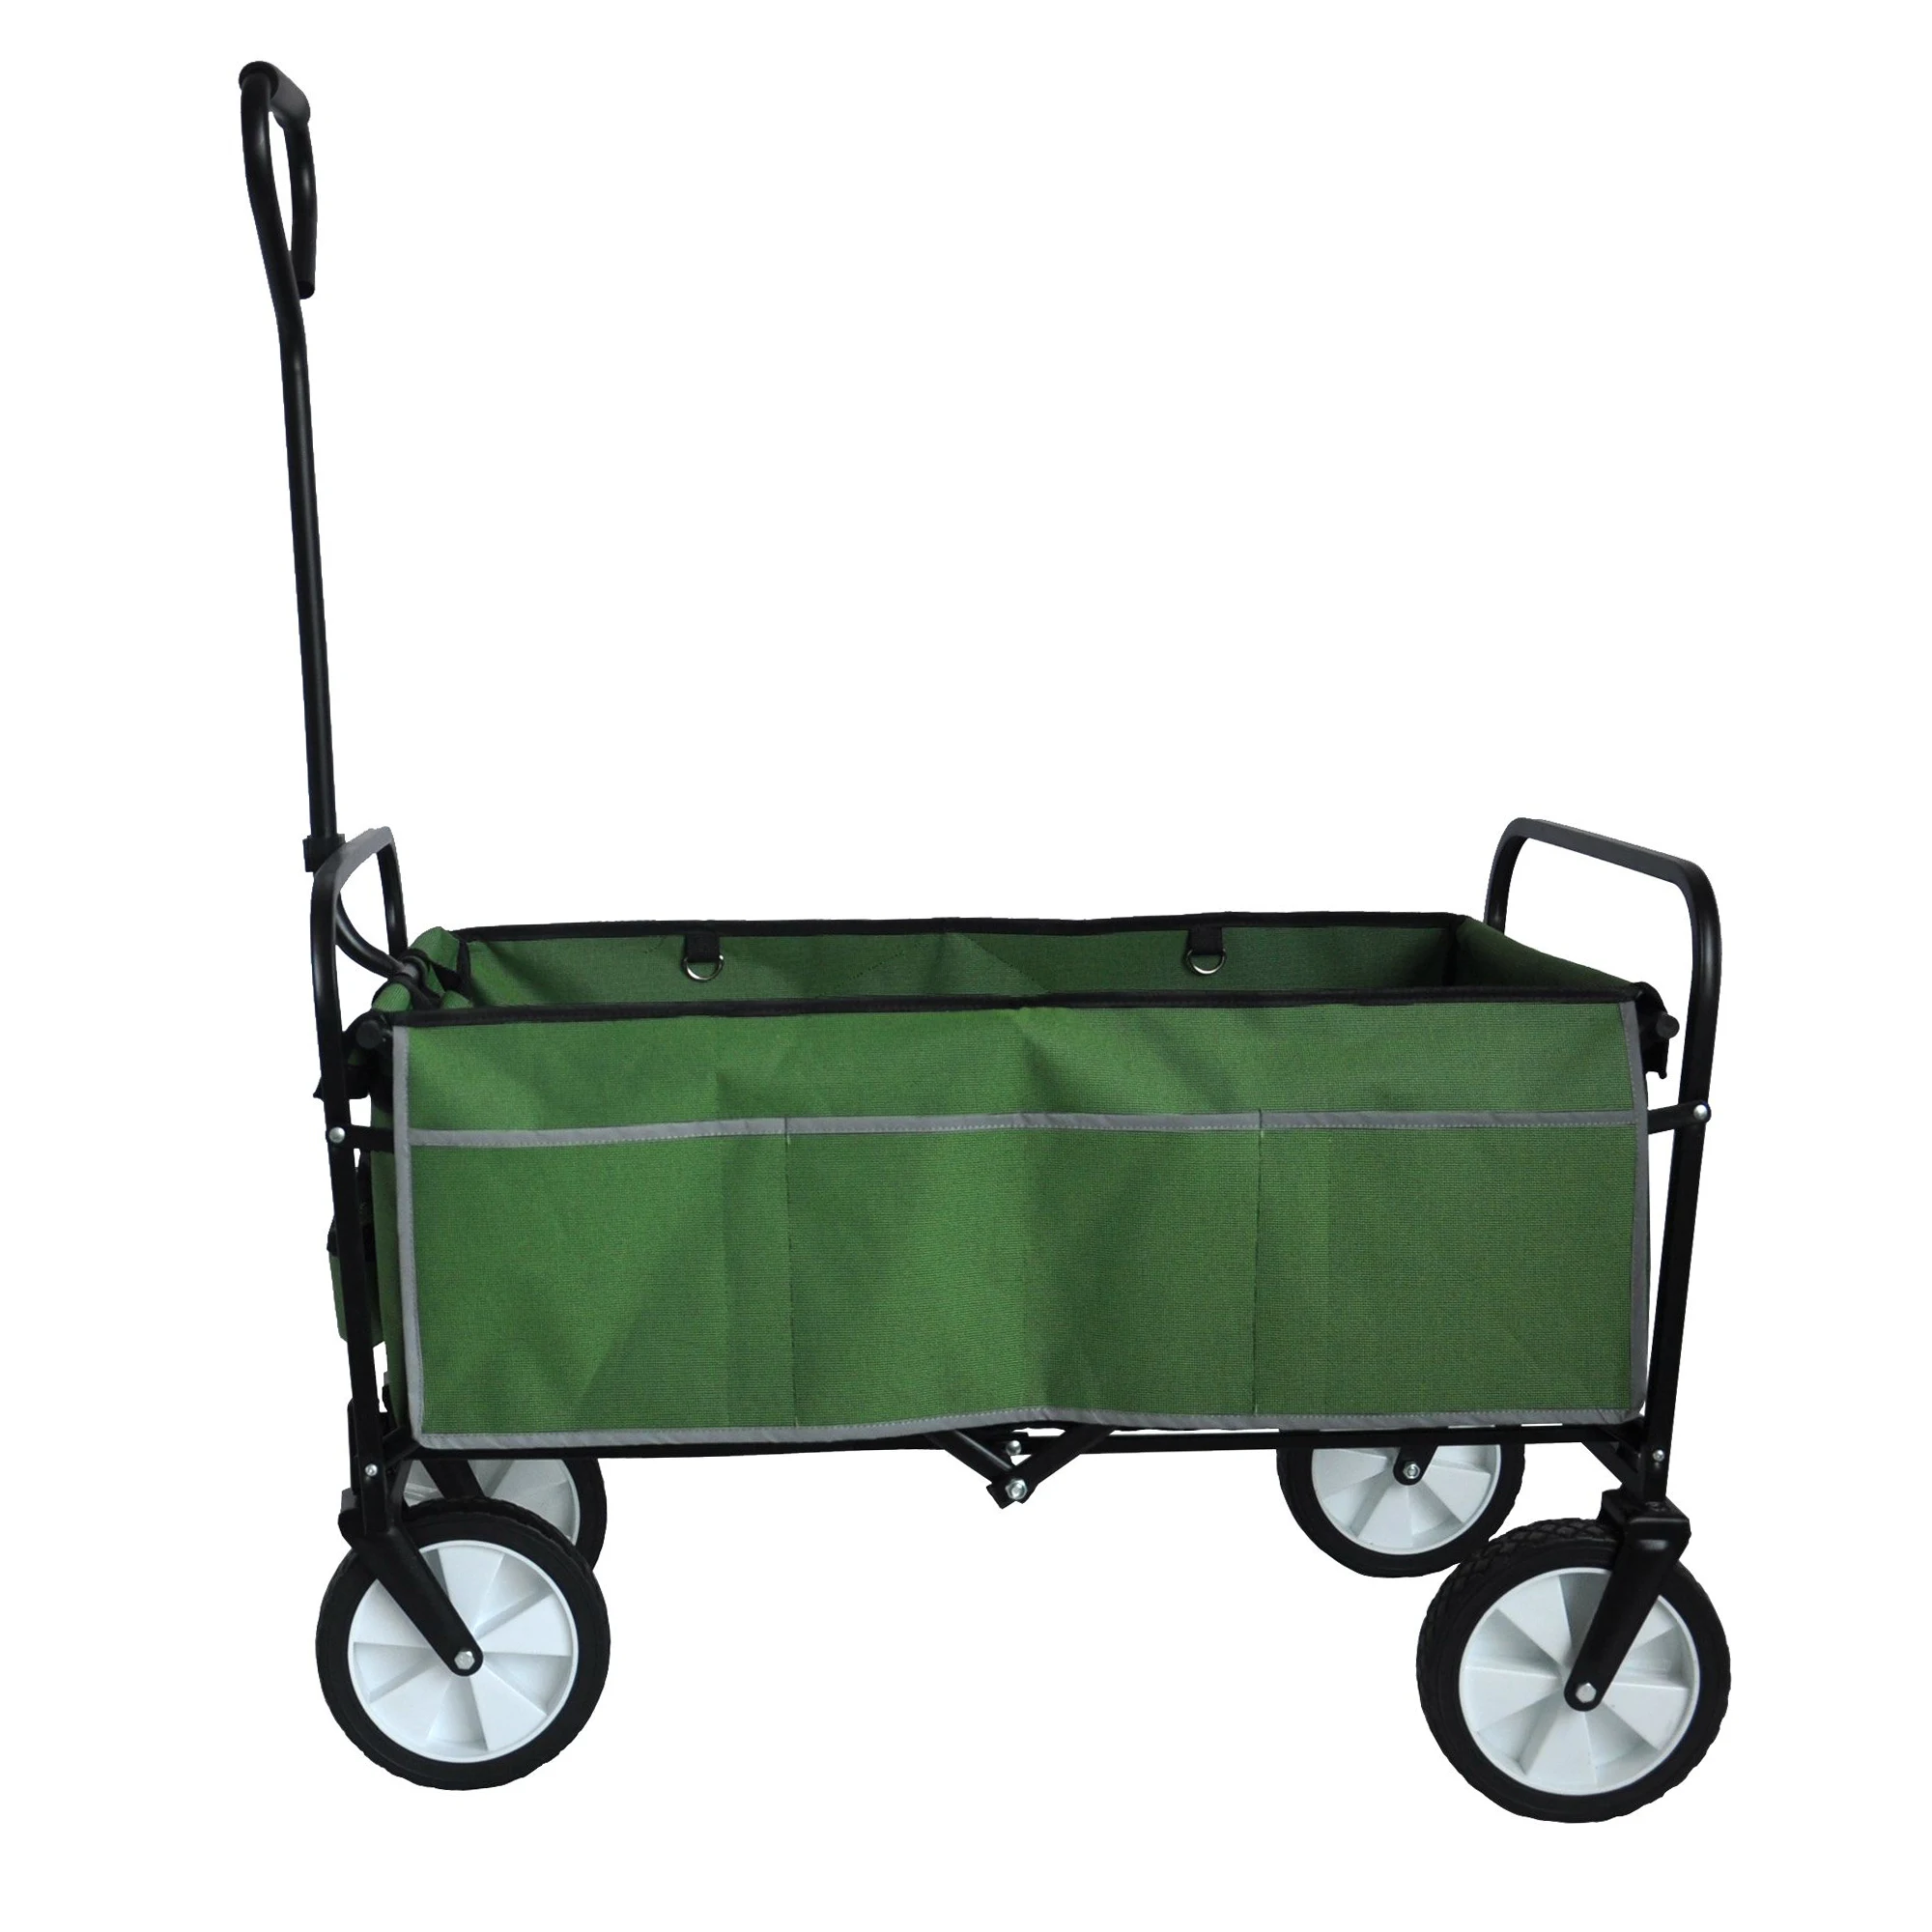 [Flash Sale]Folding Portable Wagon Garden Shopping Beach Cart with Adjustable Handle Green/Red[US-Stock]